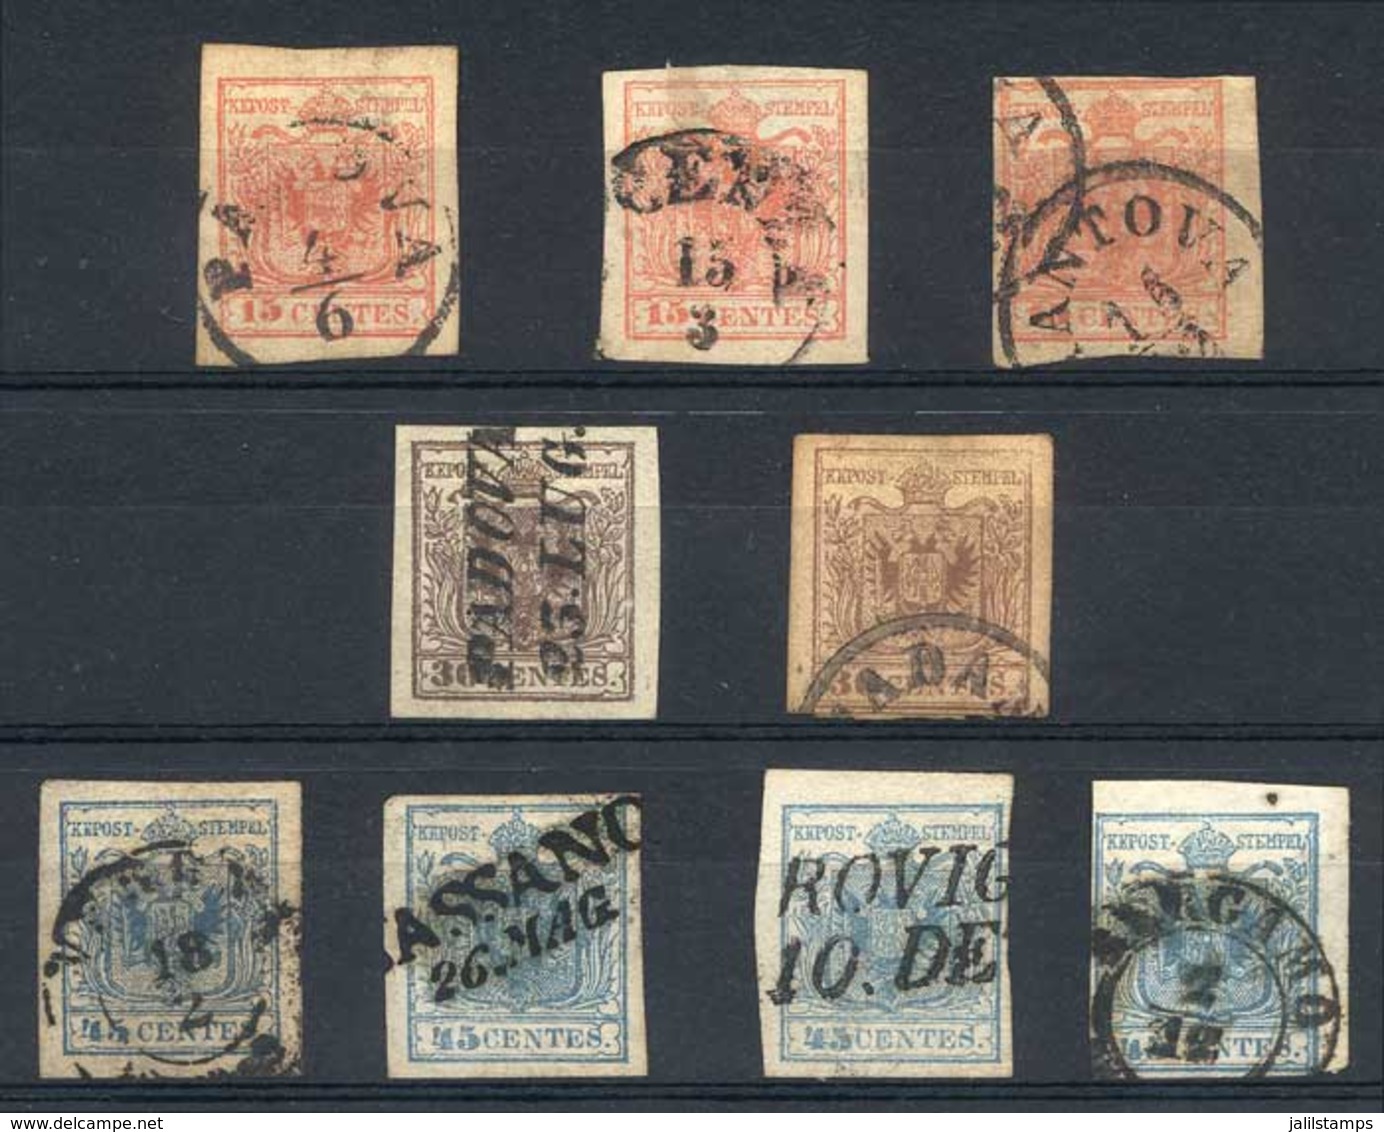 ITALY: Stockbook With Sc.4, 4b, 4f, 5, 5e, 6, 6a (x2), 6c, All Used And In General With Good Margins And Nice Postmarks, - Lombardije-Venetië